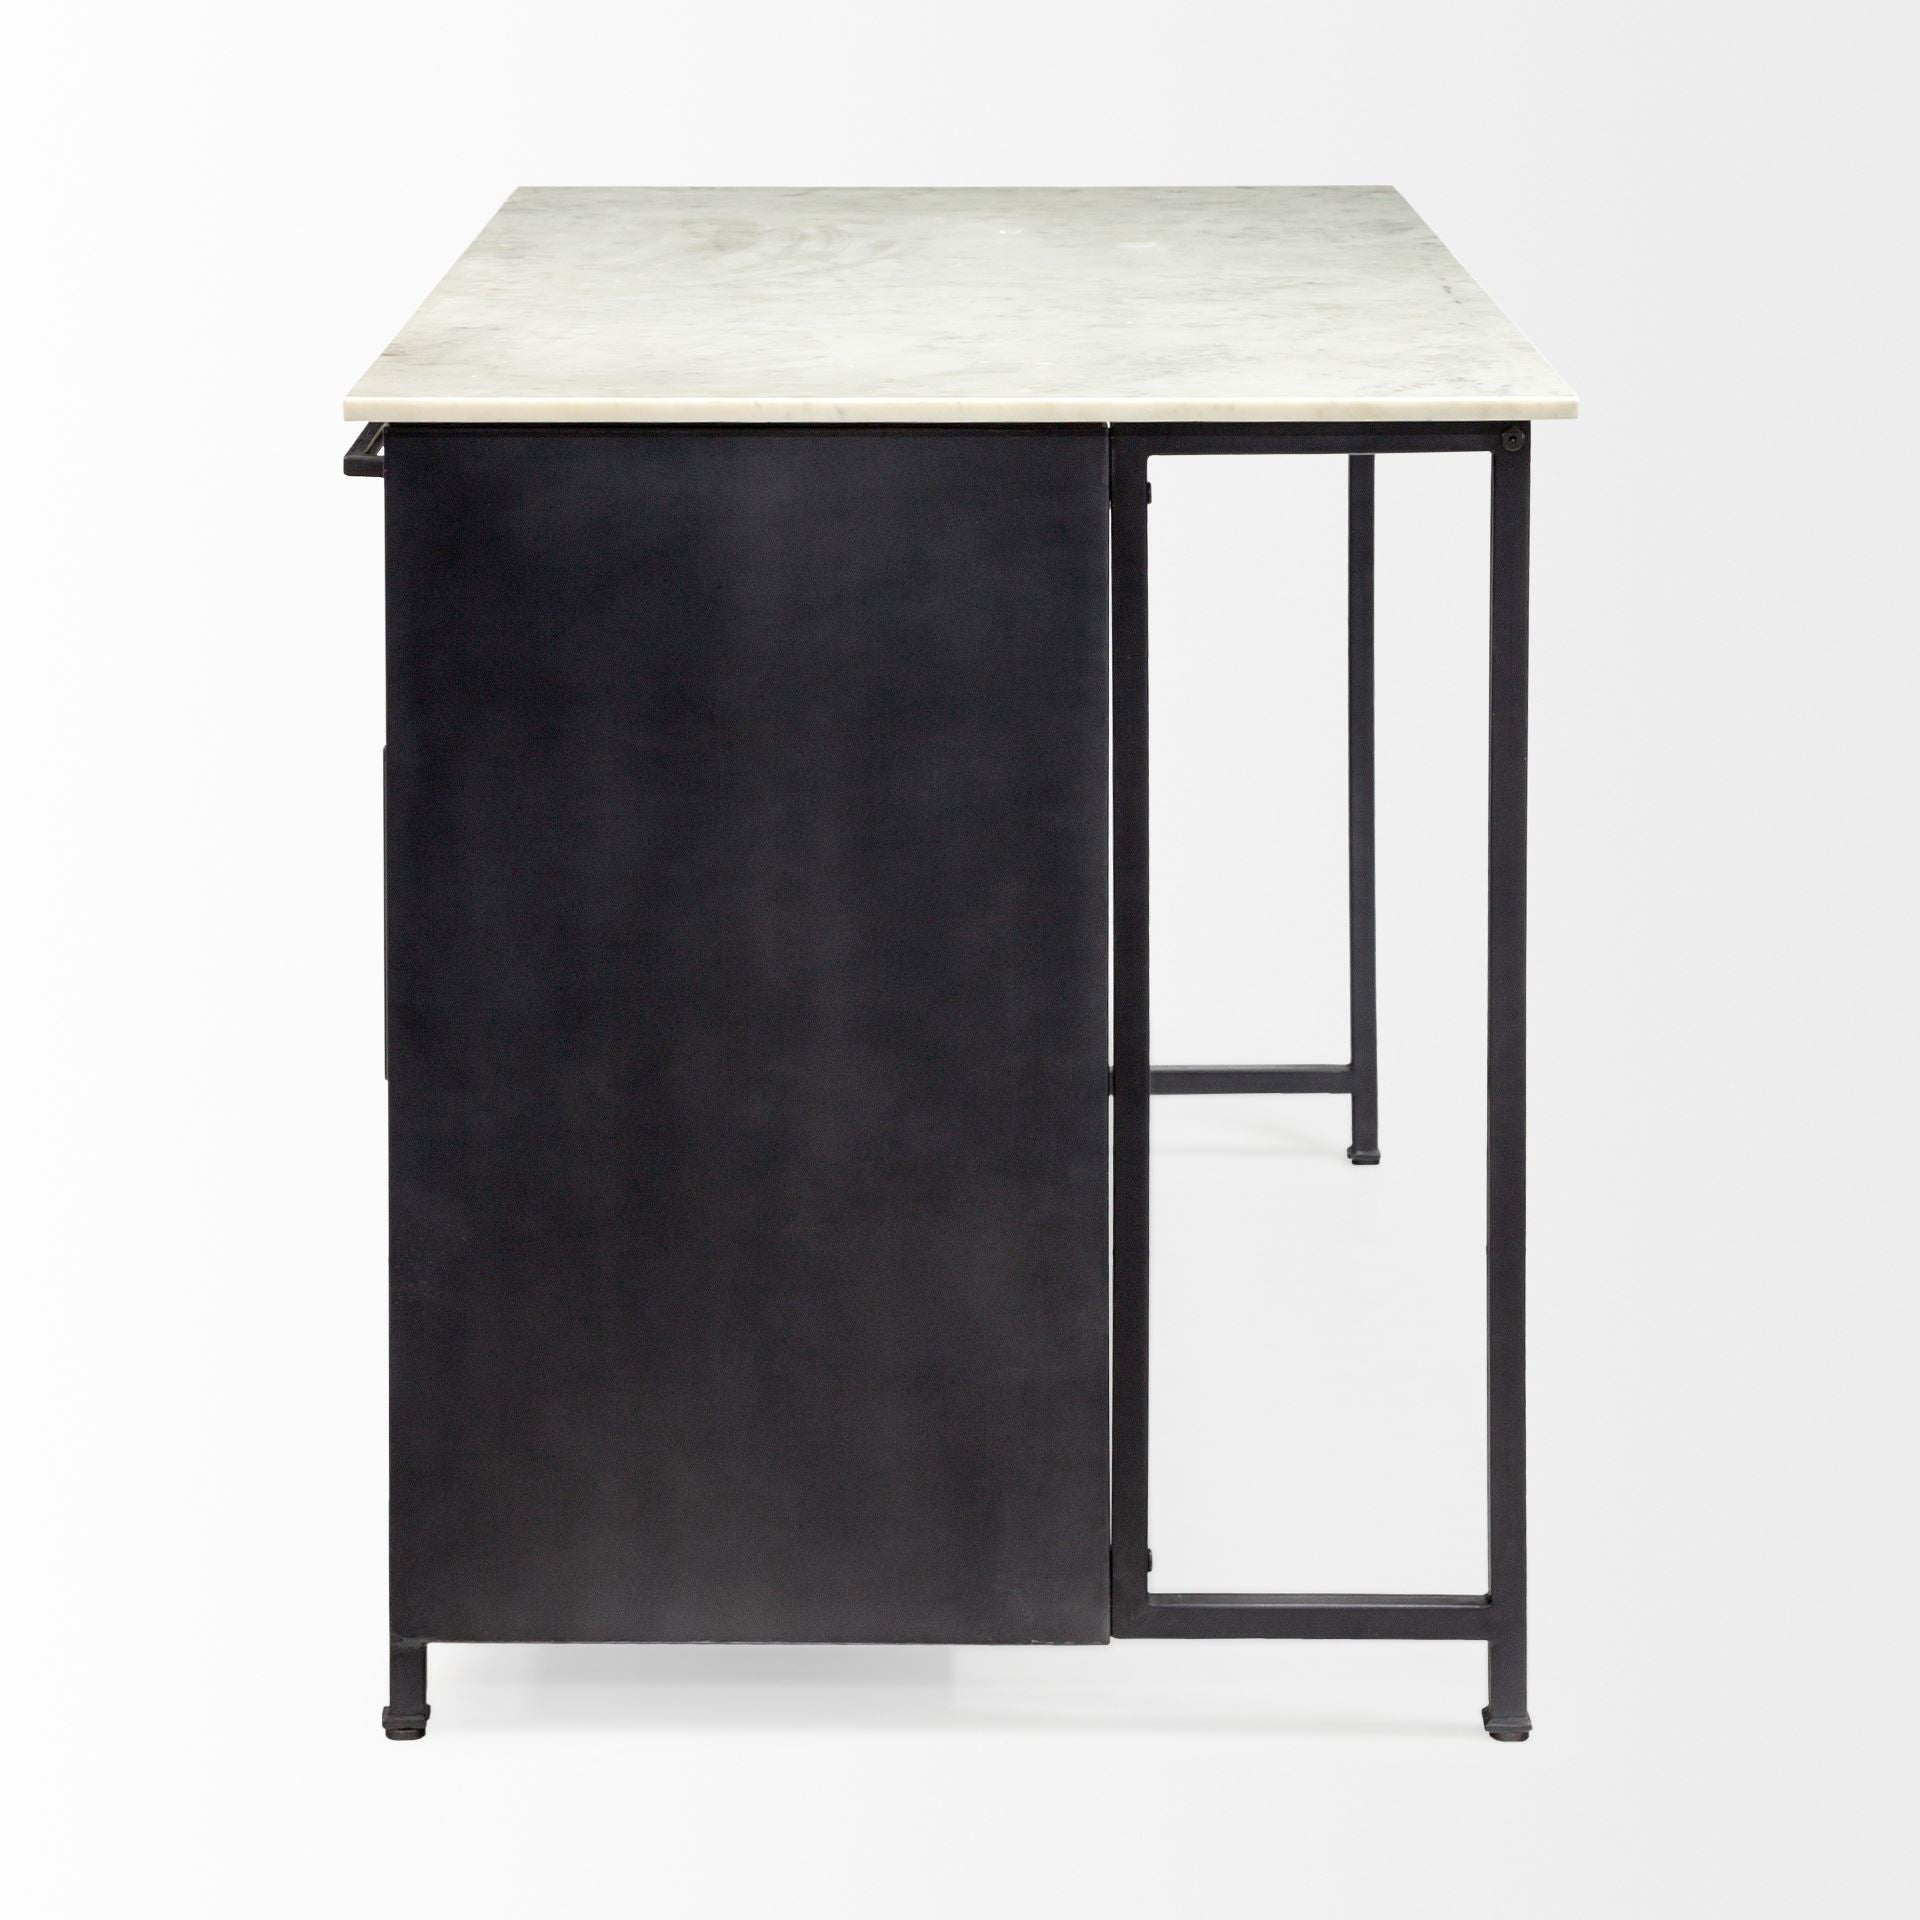 Solid Iron Black Body White Marble Top Kitchen Island With 4 Drawer